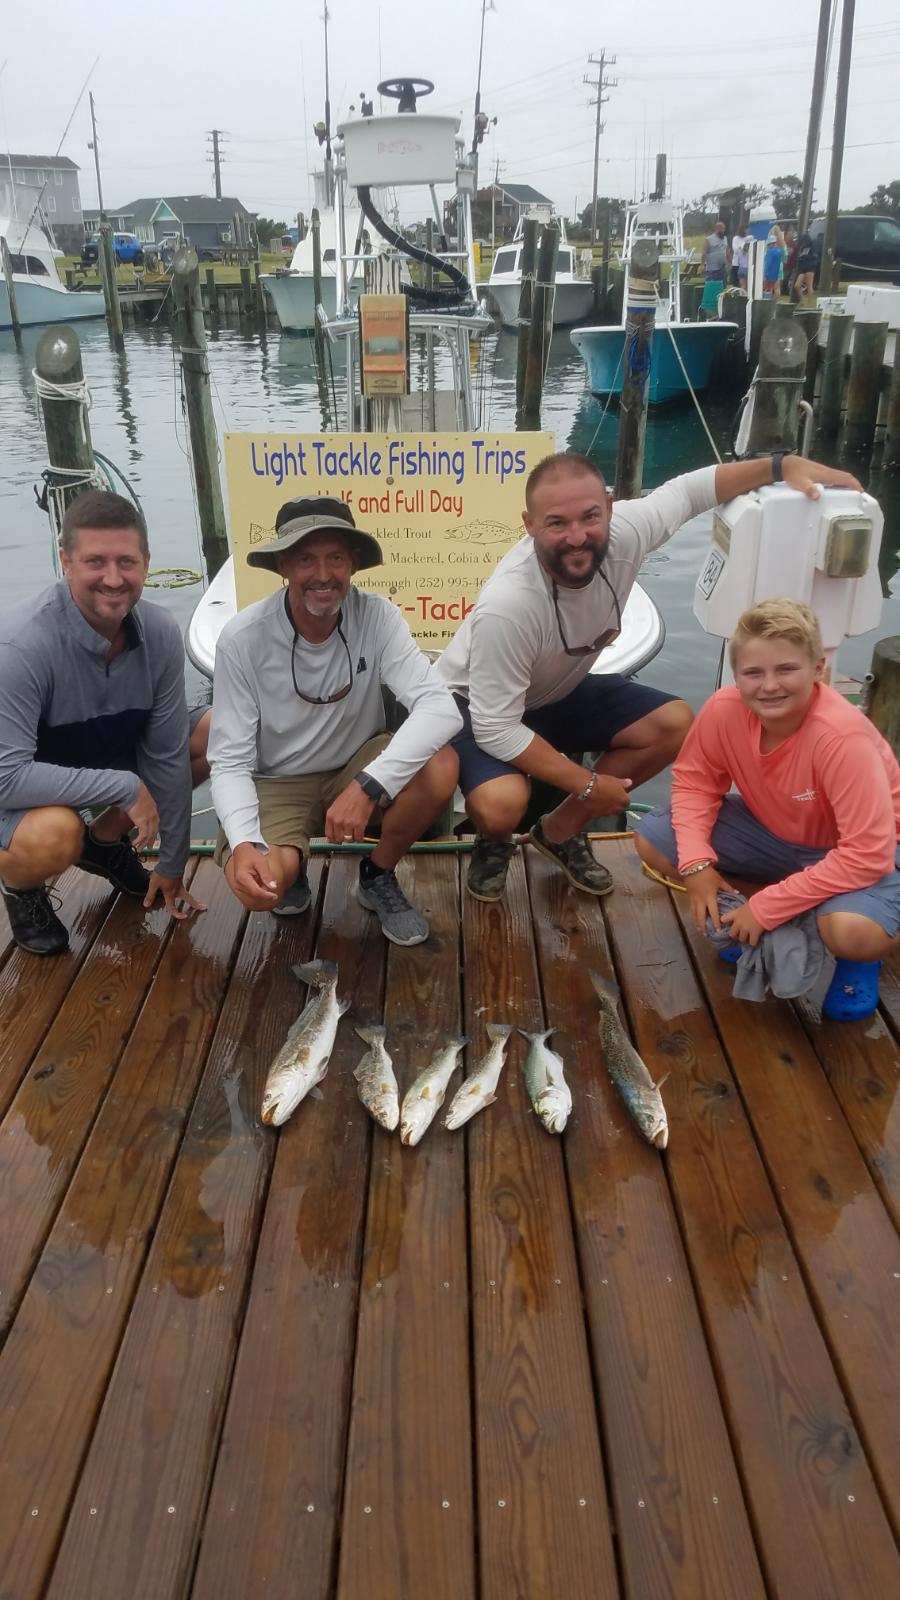 Speck-Tackler Fishing Charters Teach's Lair